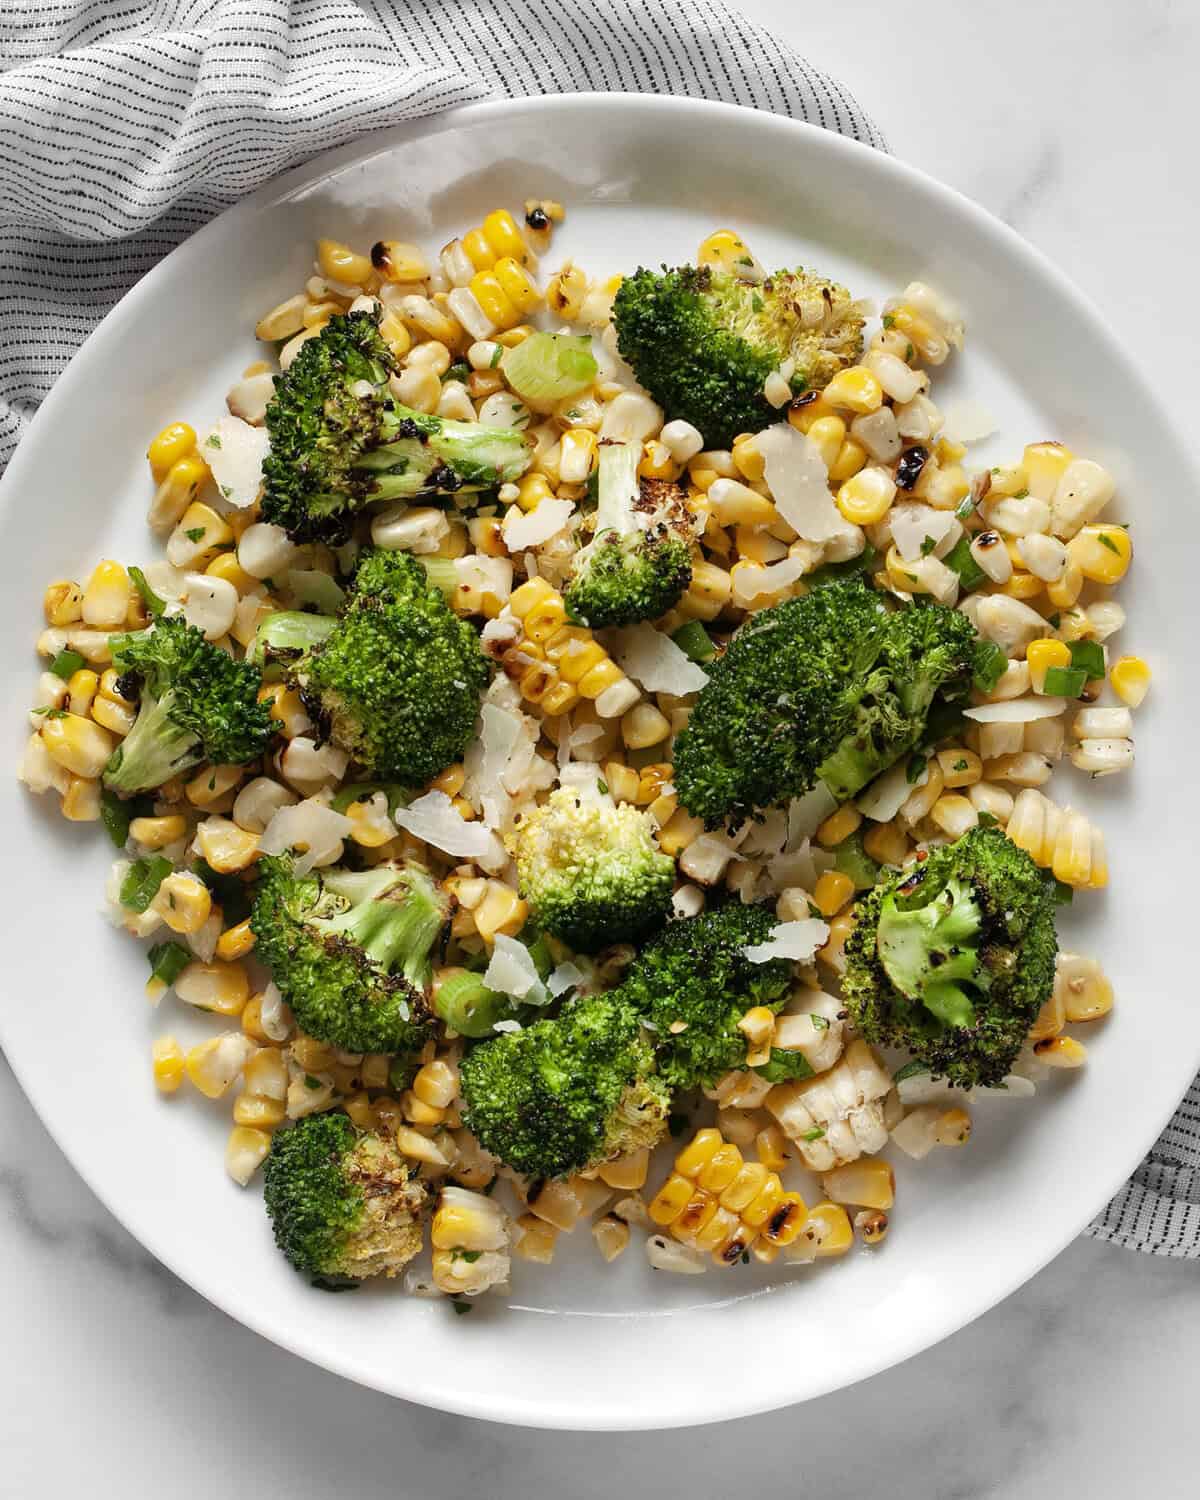 Grilled corn broccoli salad on a plate.